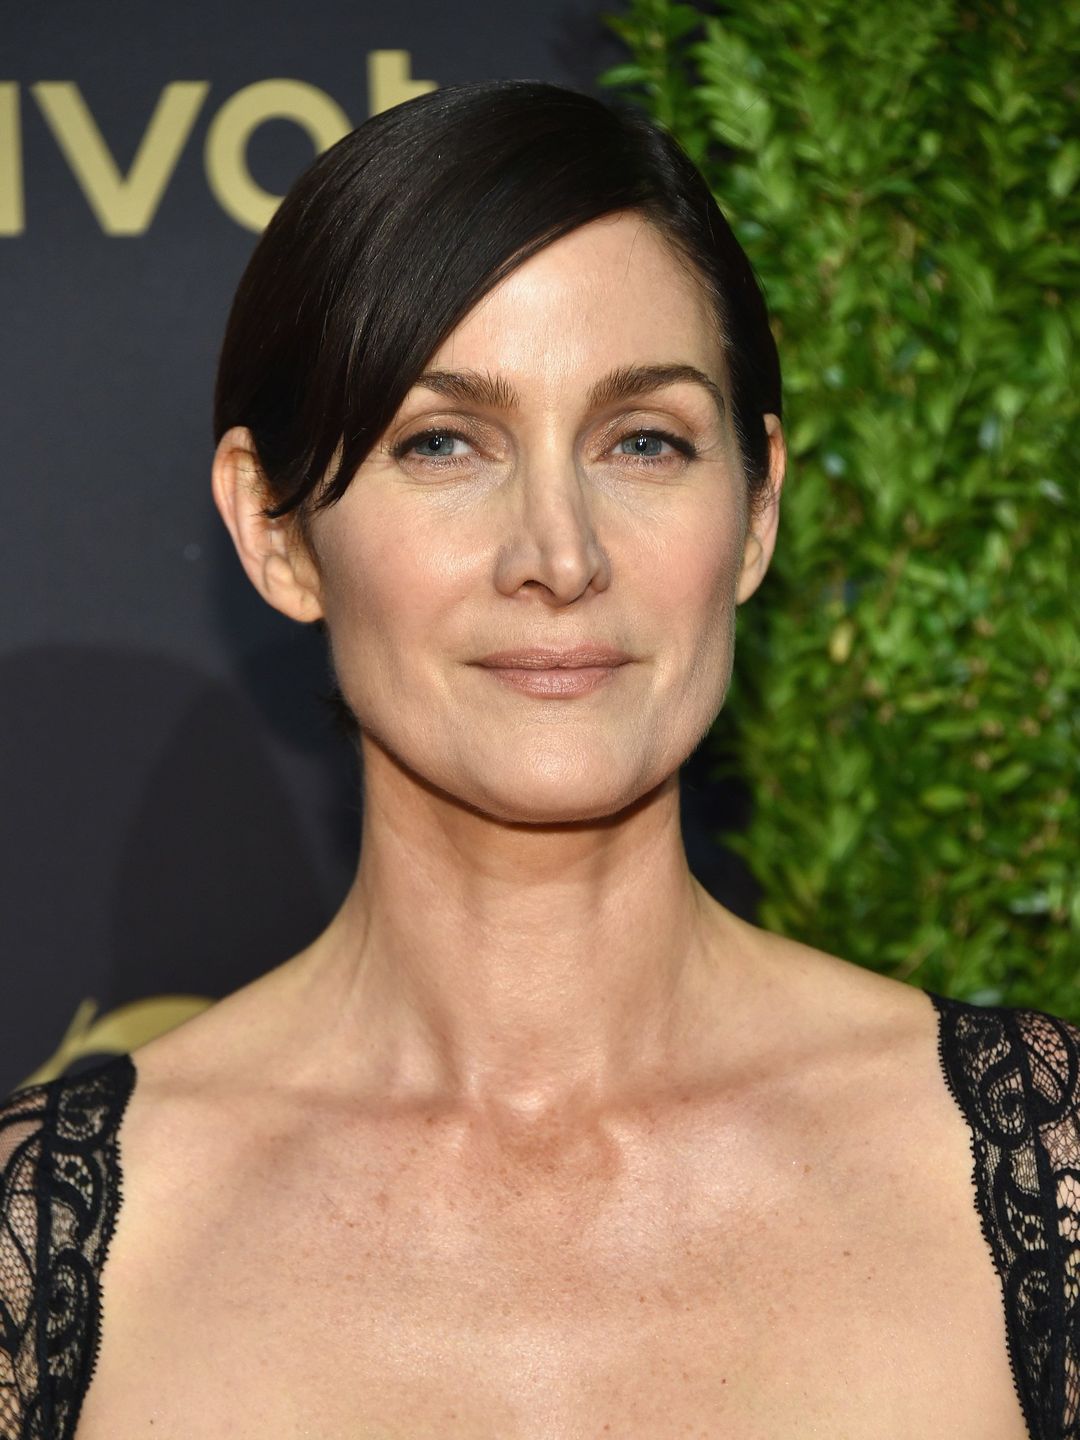 Carrie-Anne Moss current look